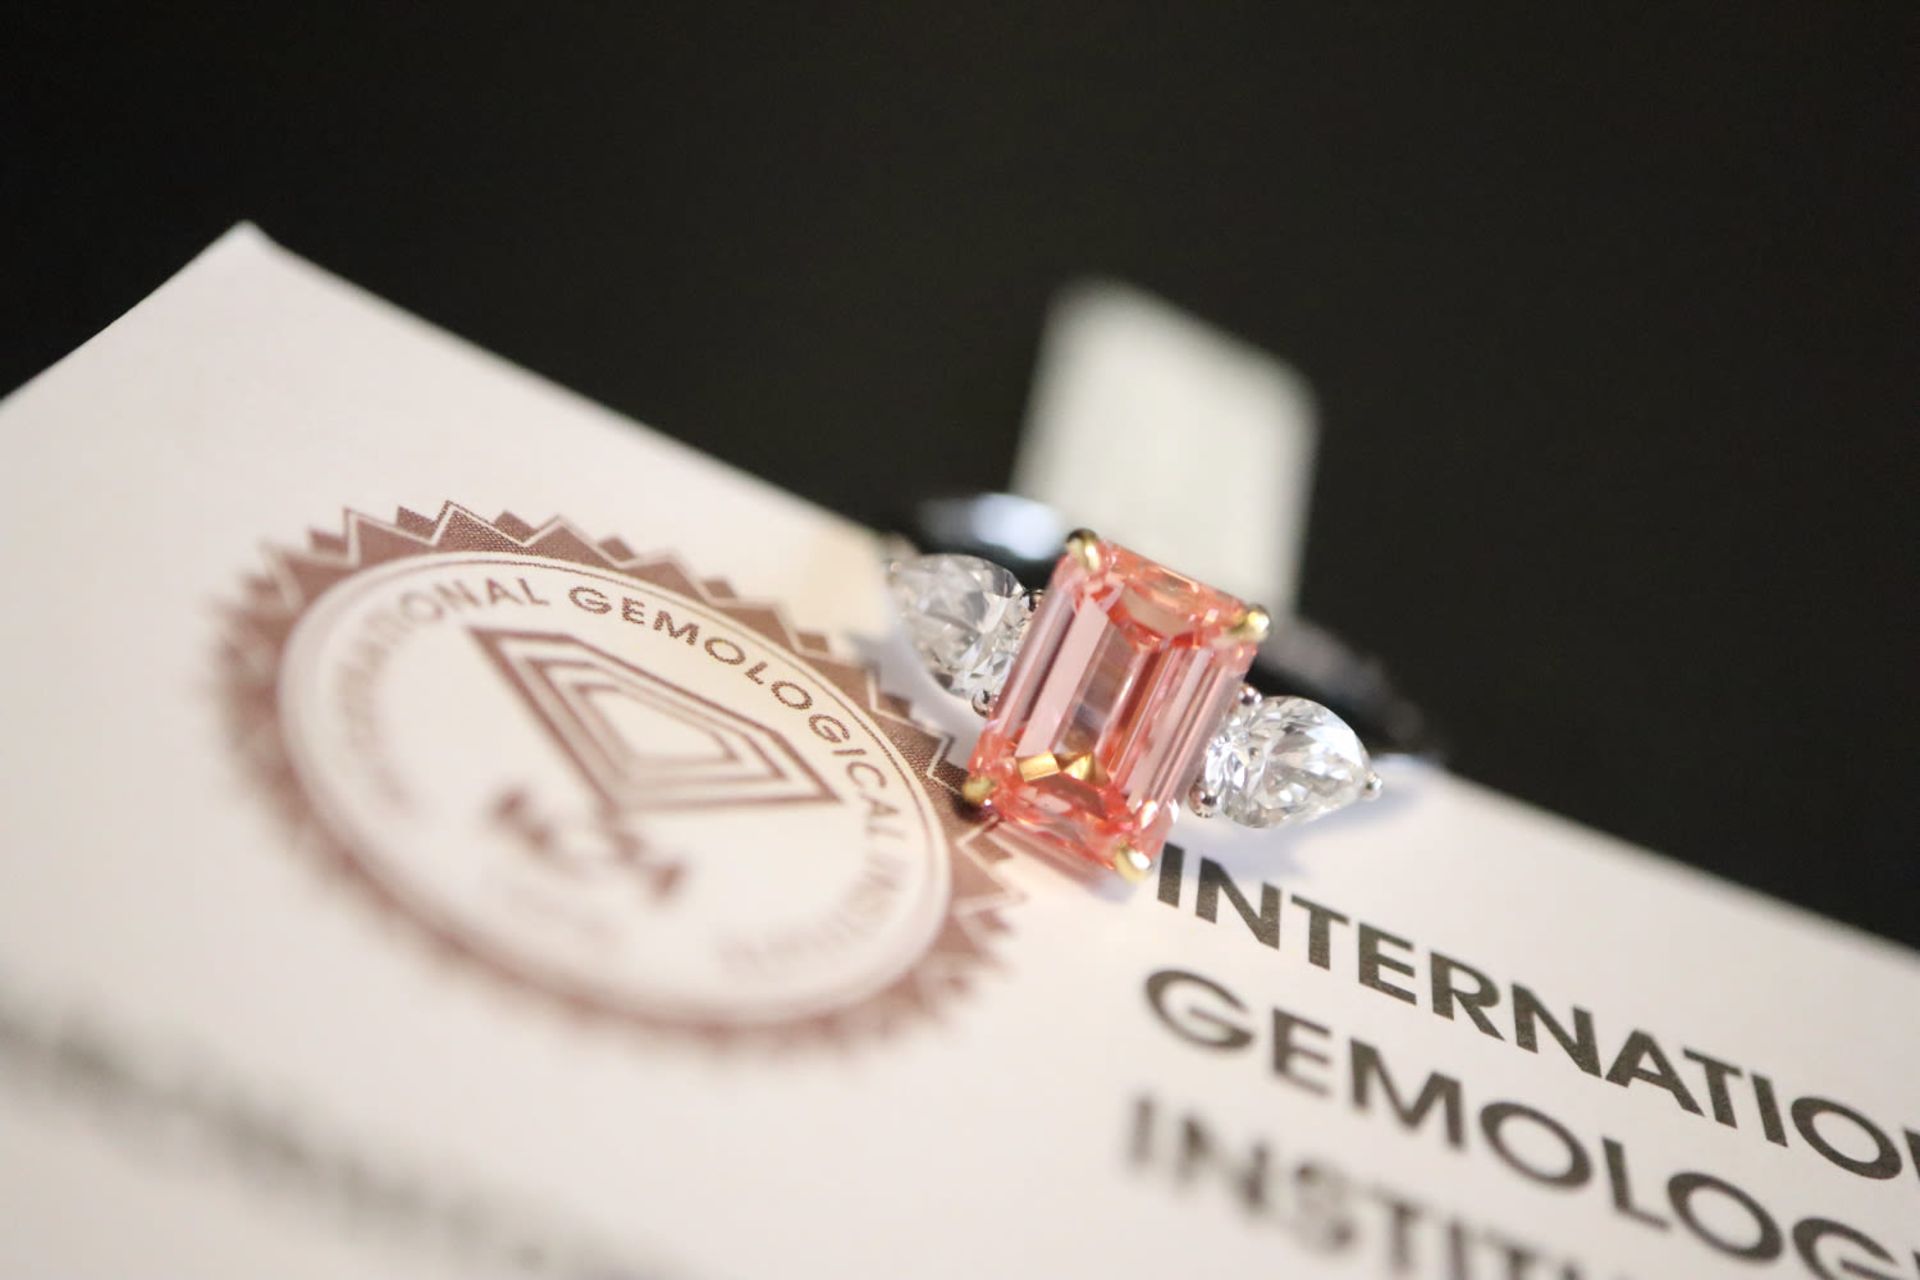 2.71CT PINK & WHITE DIAMOND TRILOGY RING, set in '950' PLATINUM MOUNT (EMERALD & PEAR CUTS) - Image 10 of 14